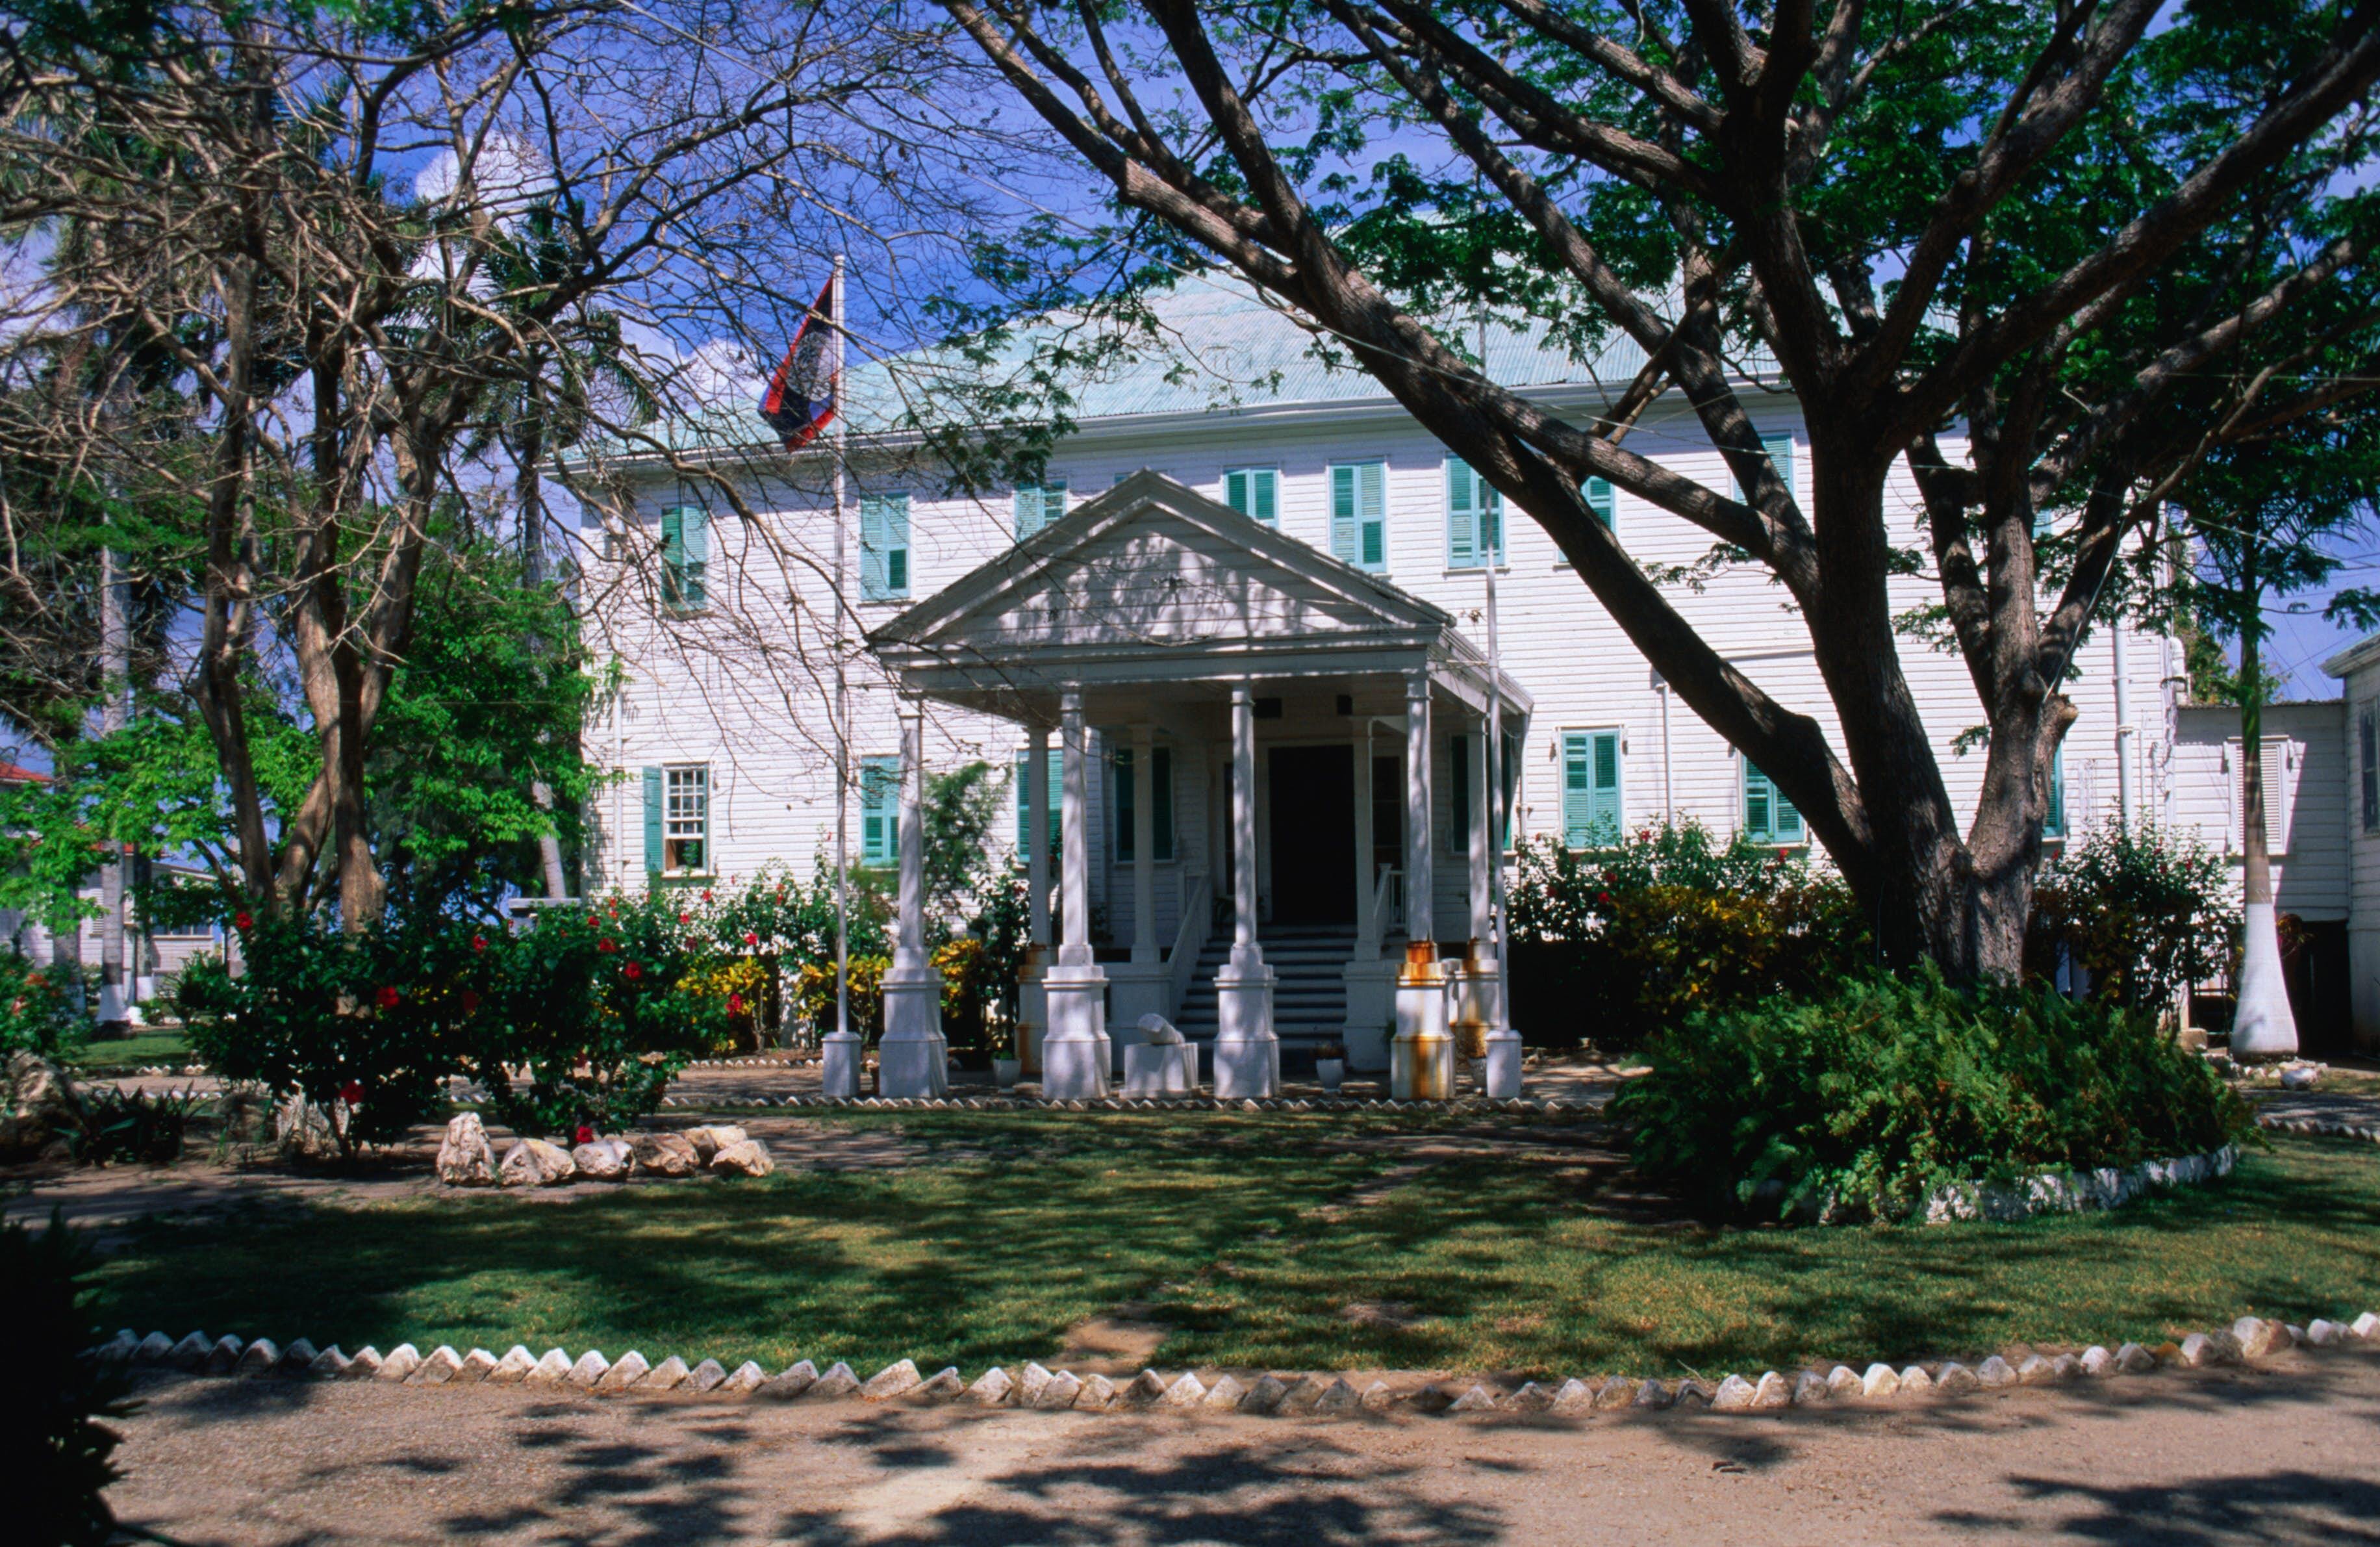 The Government House Museum, dating from 1814.